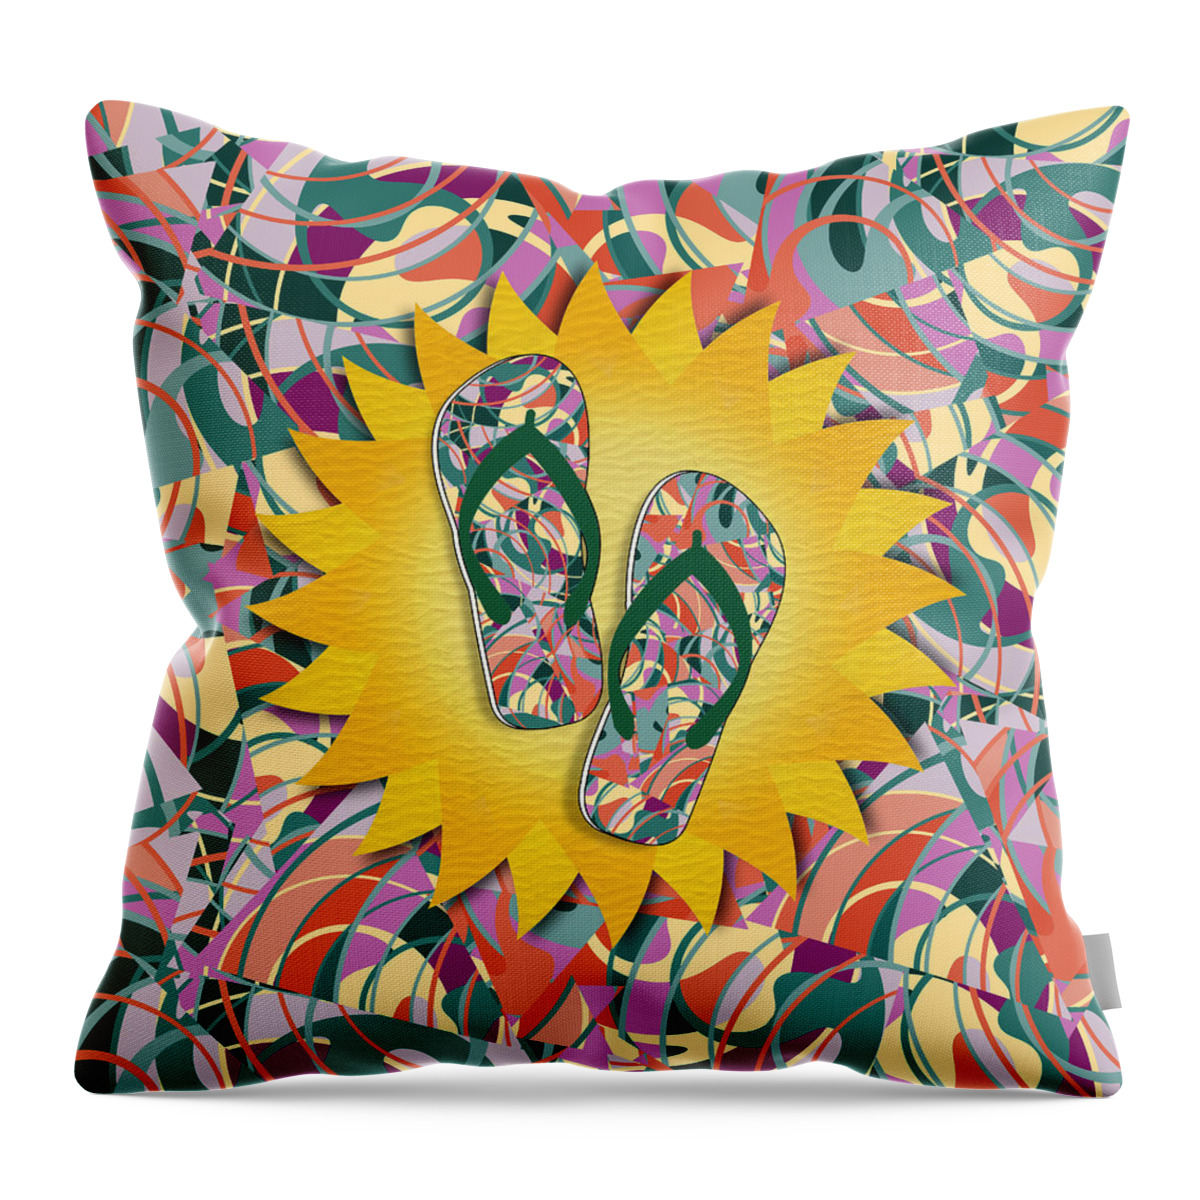  Throw Pillow featuring the mixed media Sunshine and Colorful Abstract Flip-Flops by Gravityx9 Designs